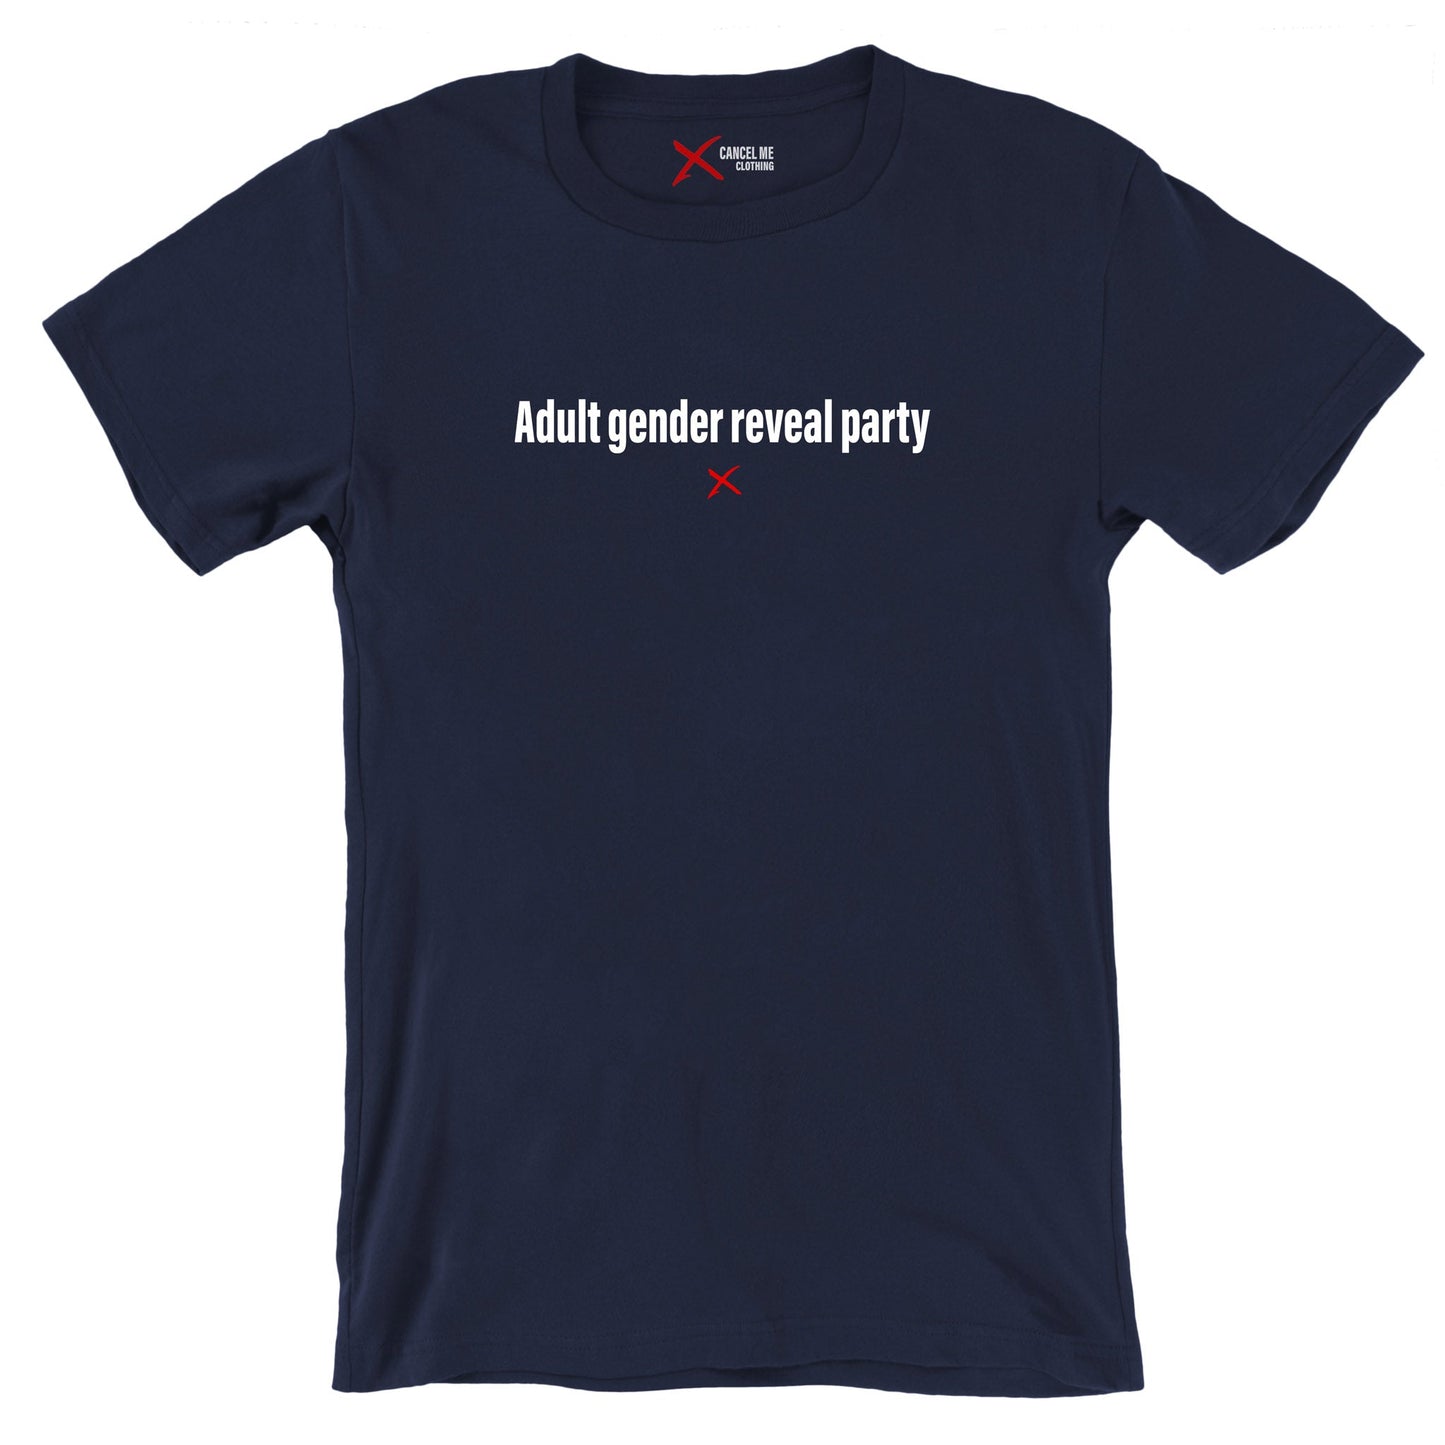 Adult gender reveal party - Shirt